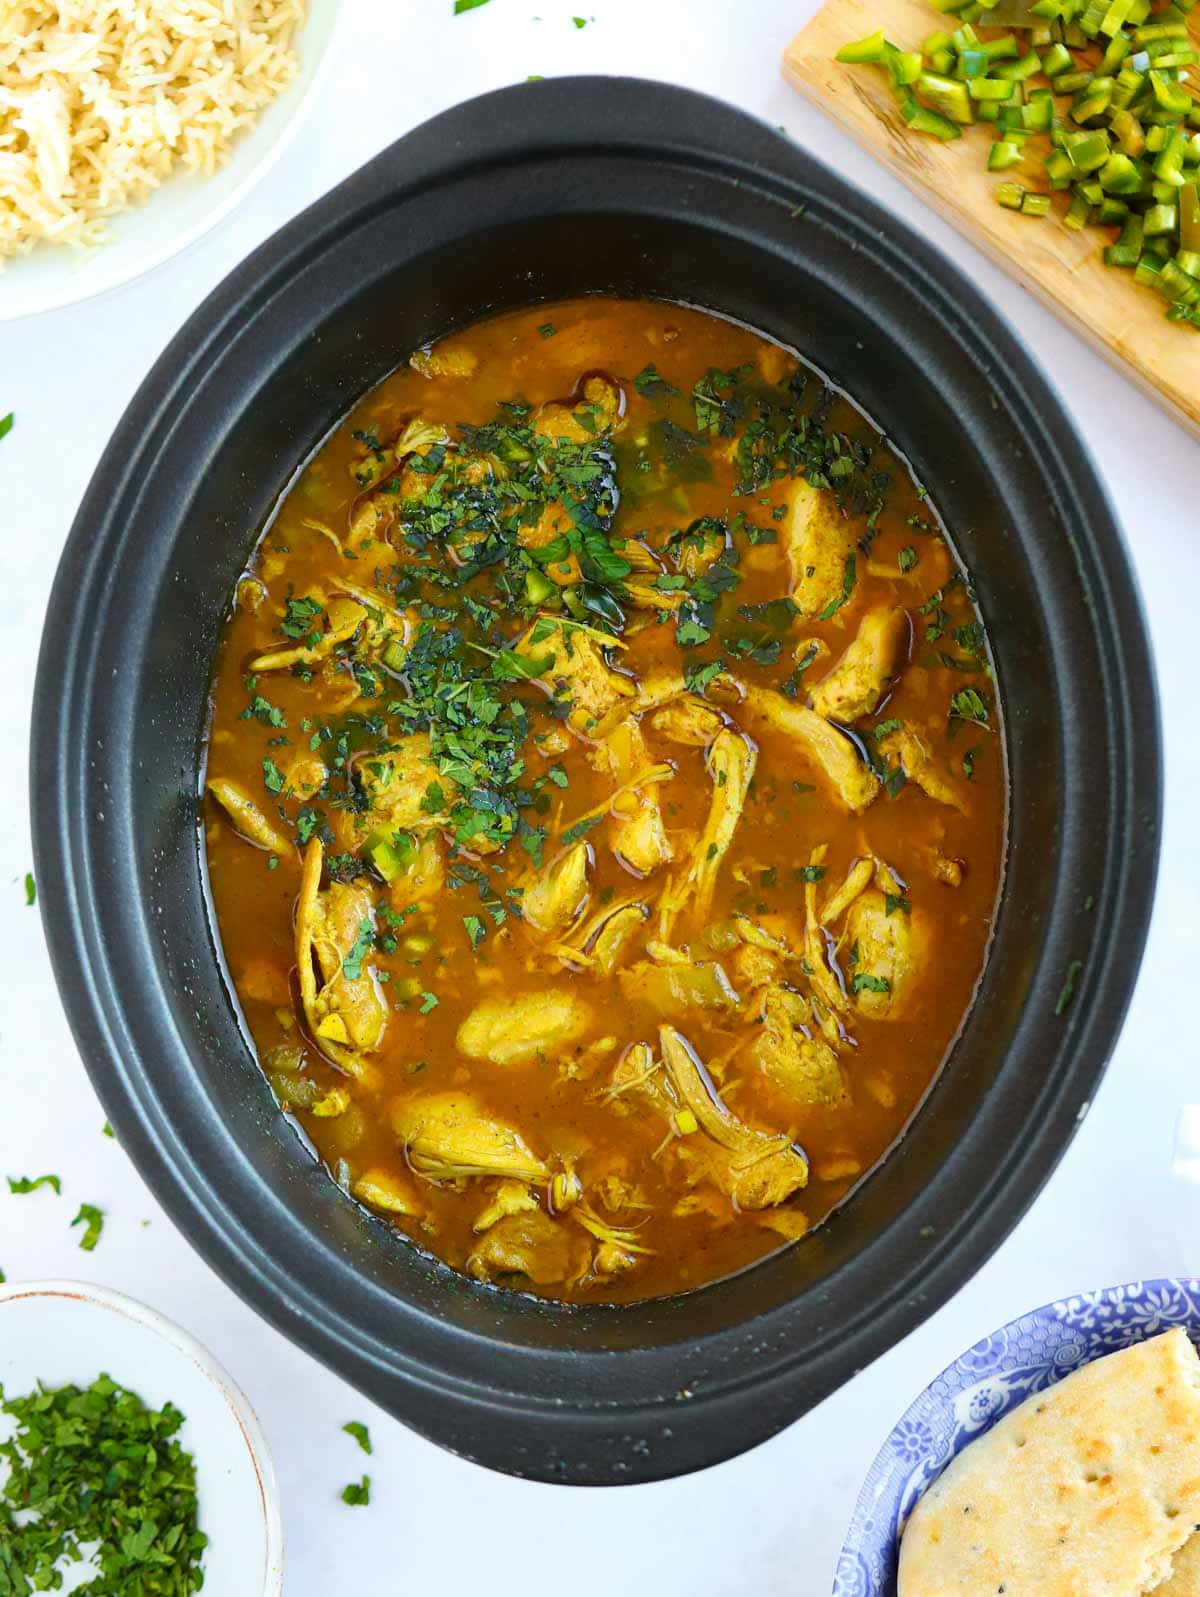 Slimming world friendly slow cooker chicken curry